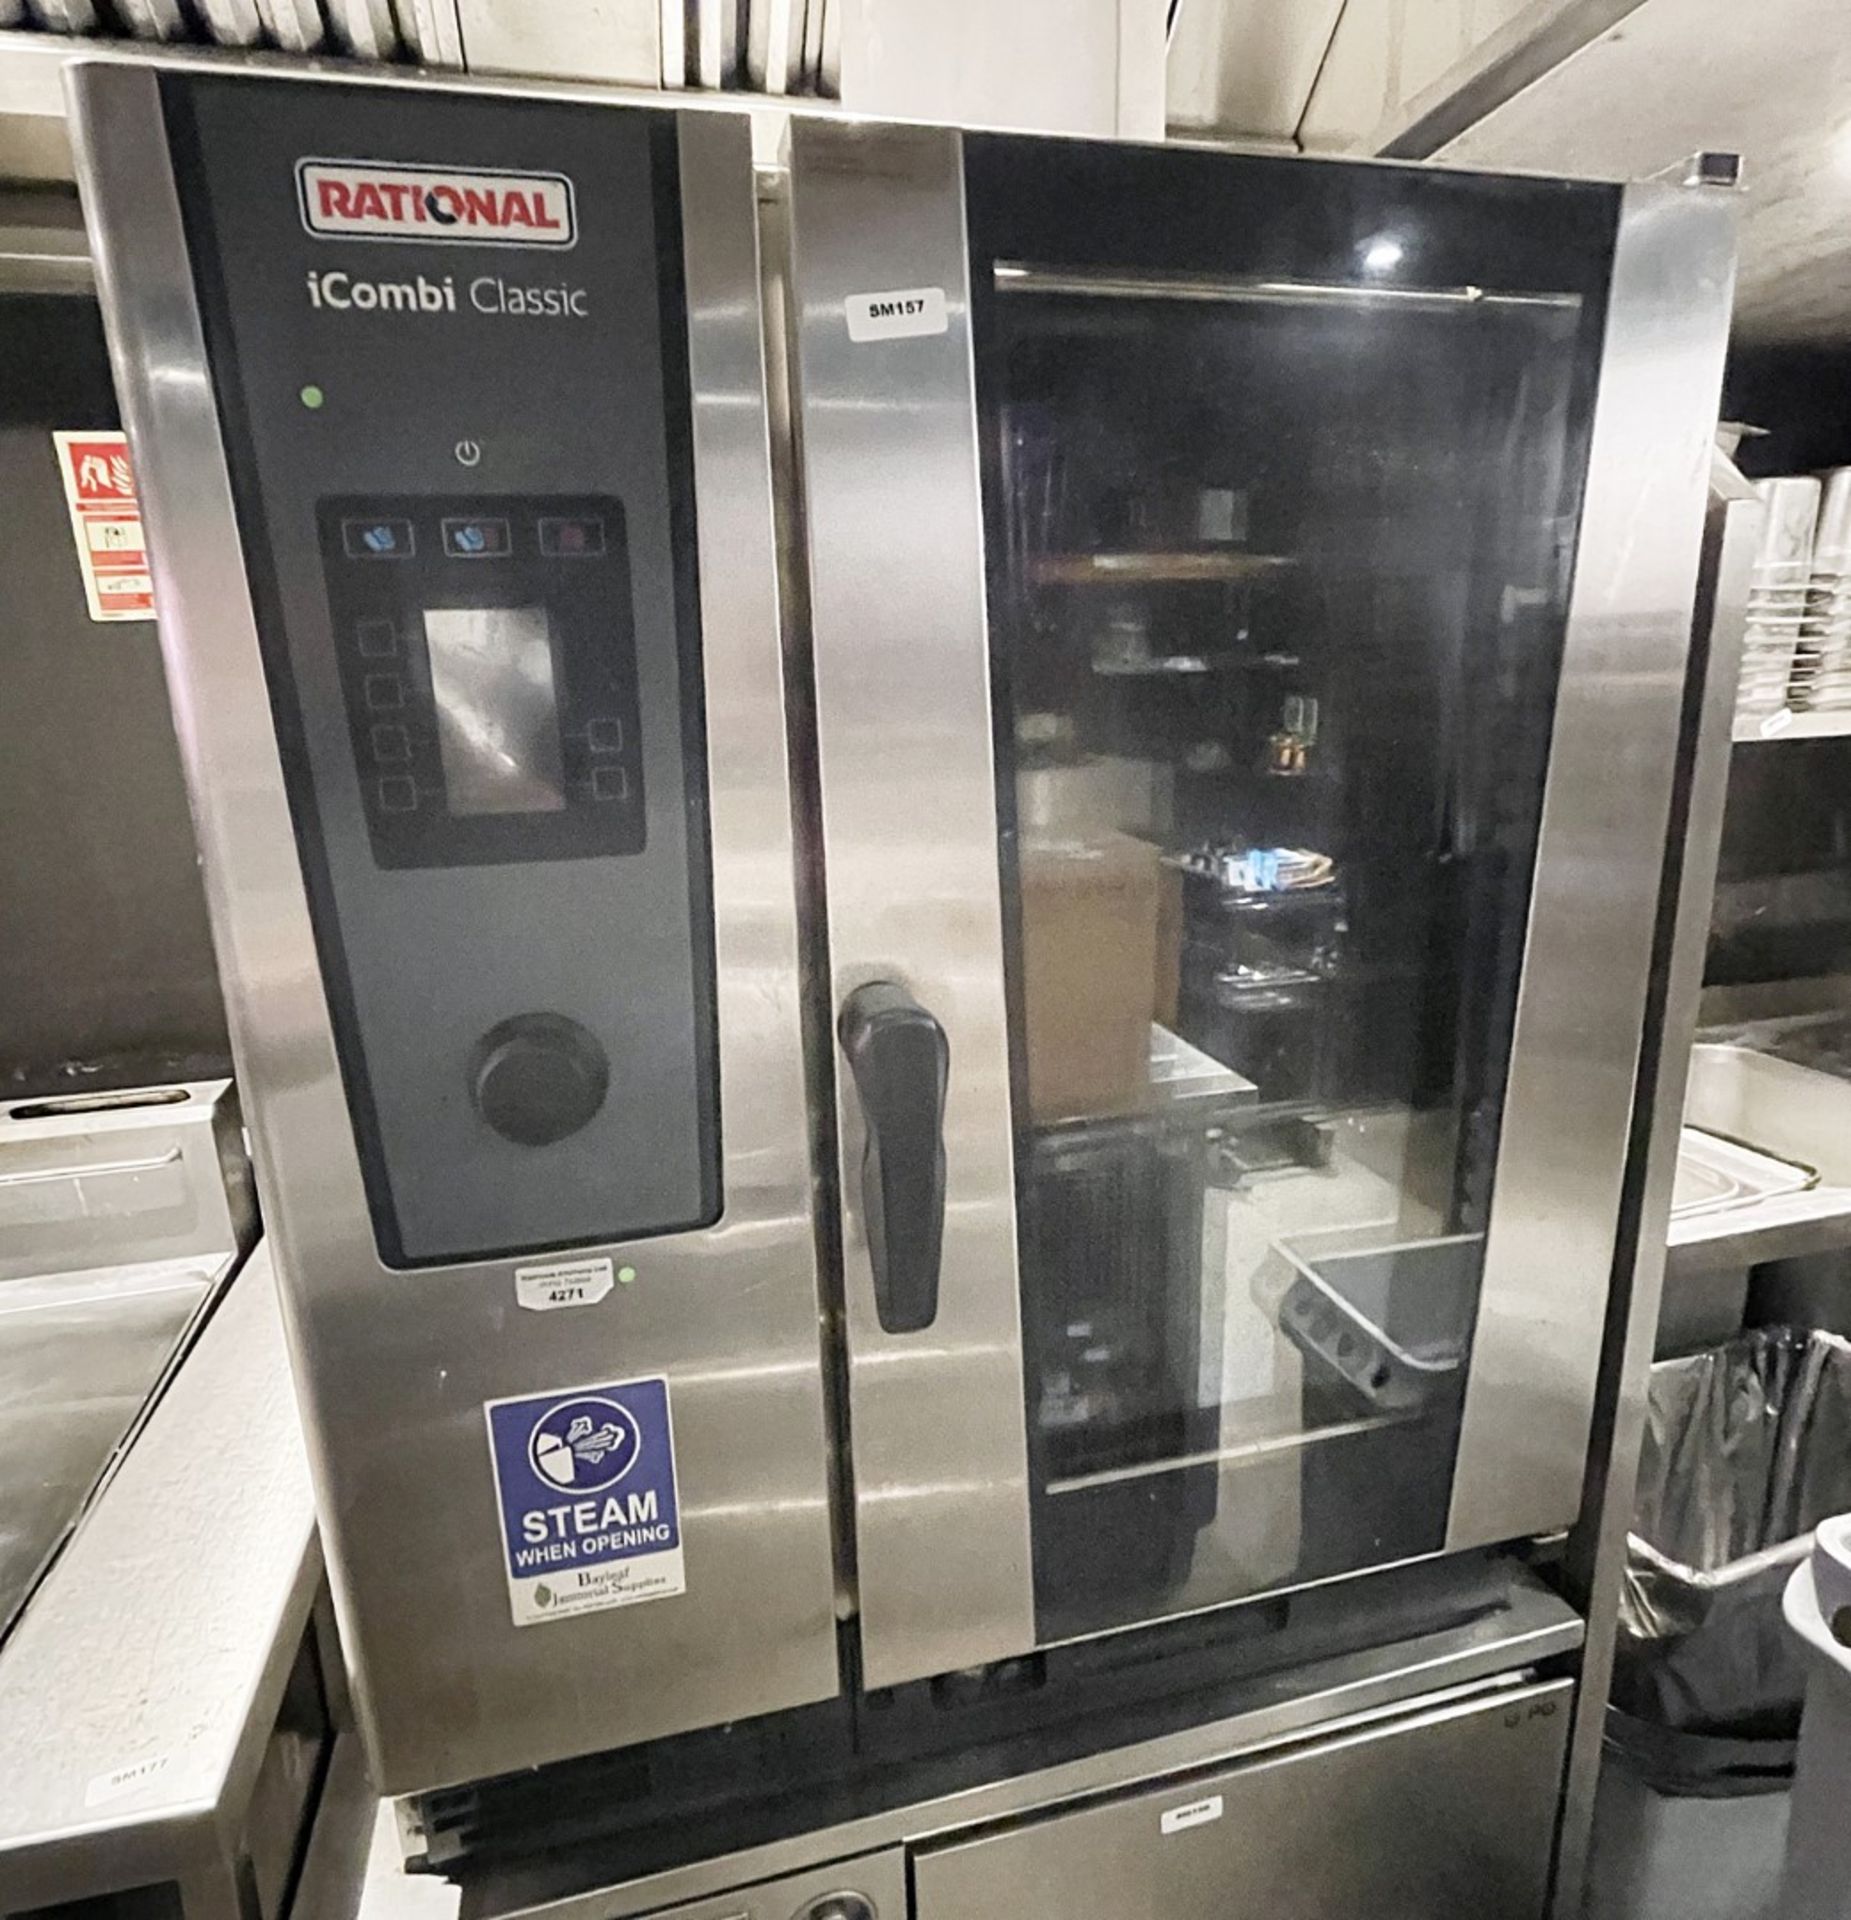 1 x Rational iCombi Classic Electric 3 Phase 10 Grid Combi Oven - Year: 2021 - Model: LM200DE